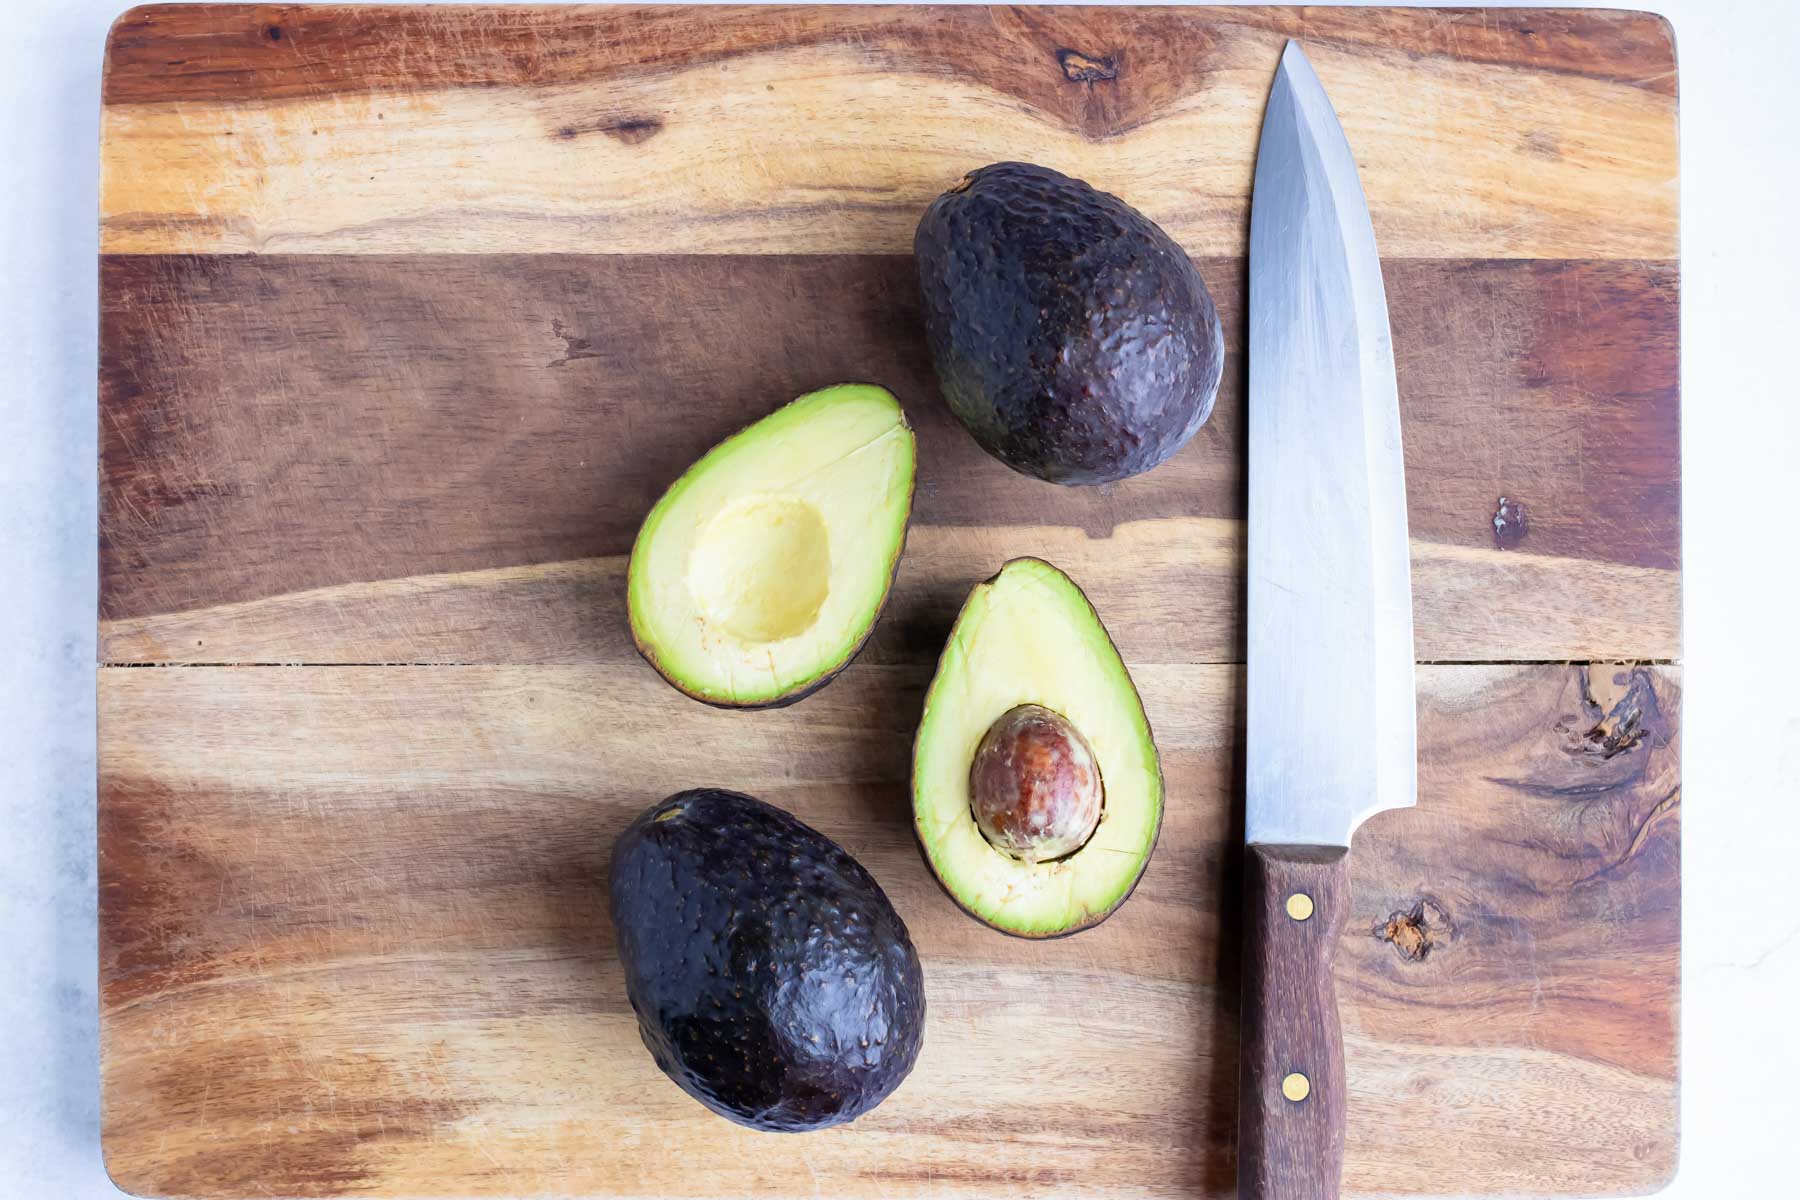 A halved avocado sits beside two more avocados and a kitchen knife on a cutting board.